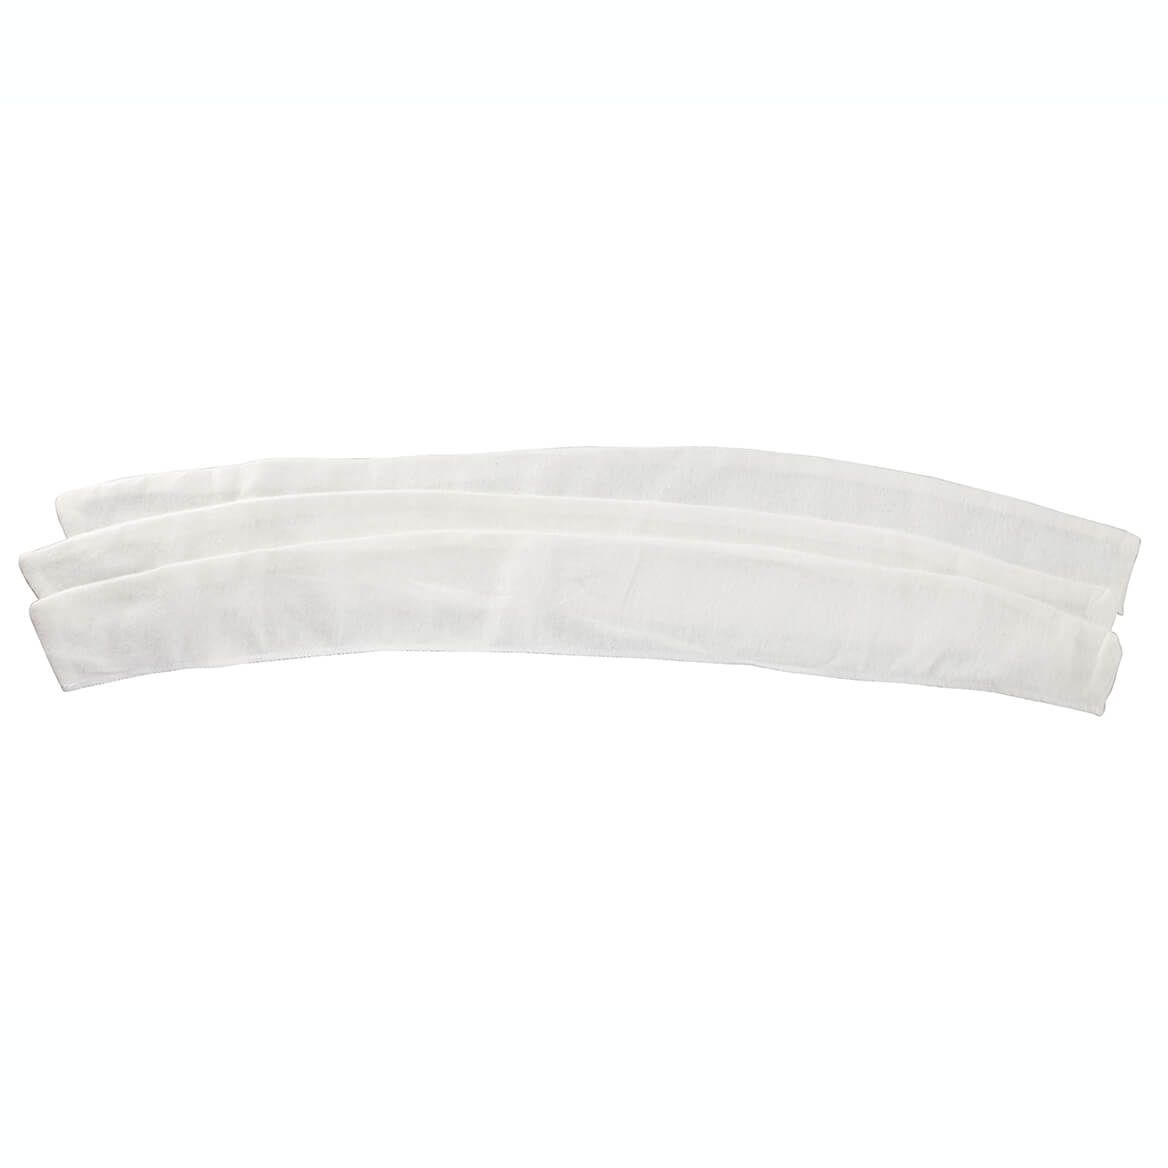  More of Me To Love Original Tummy Liner (Pack of 3) Size XL,  White … : Baby